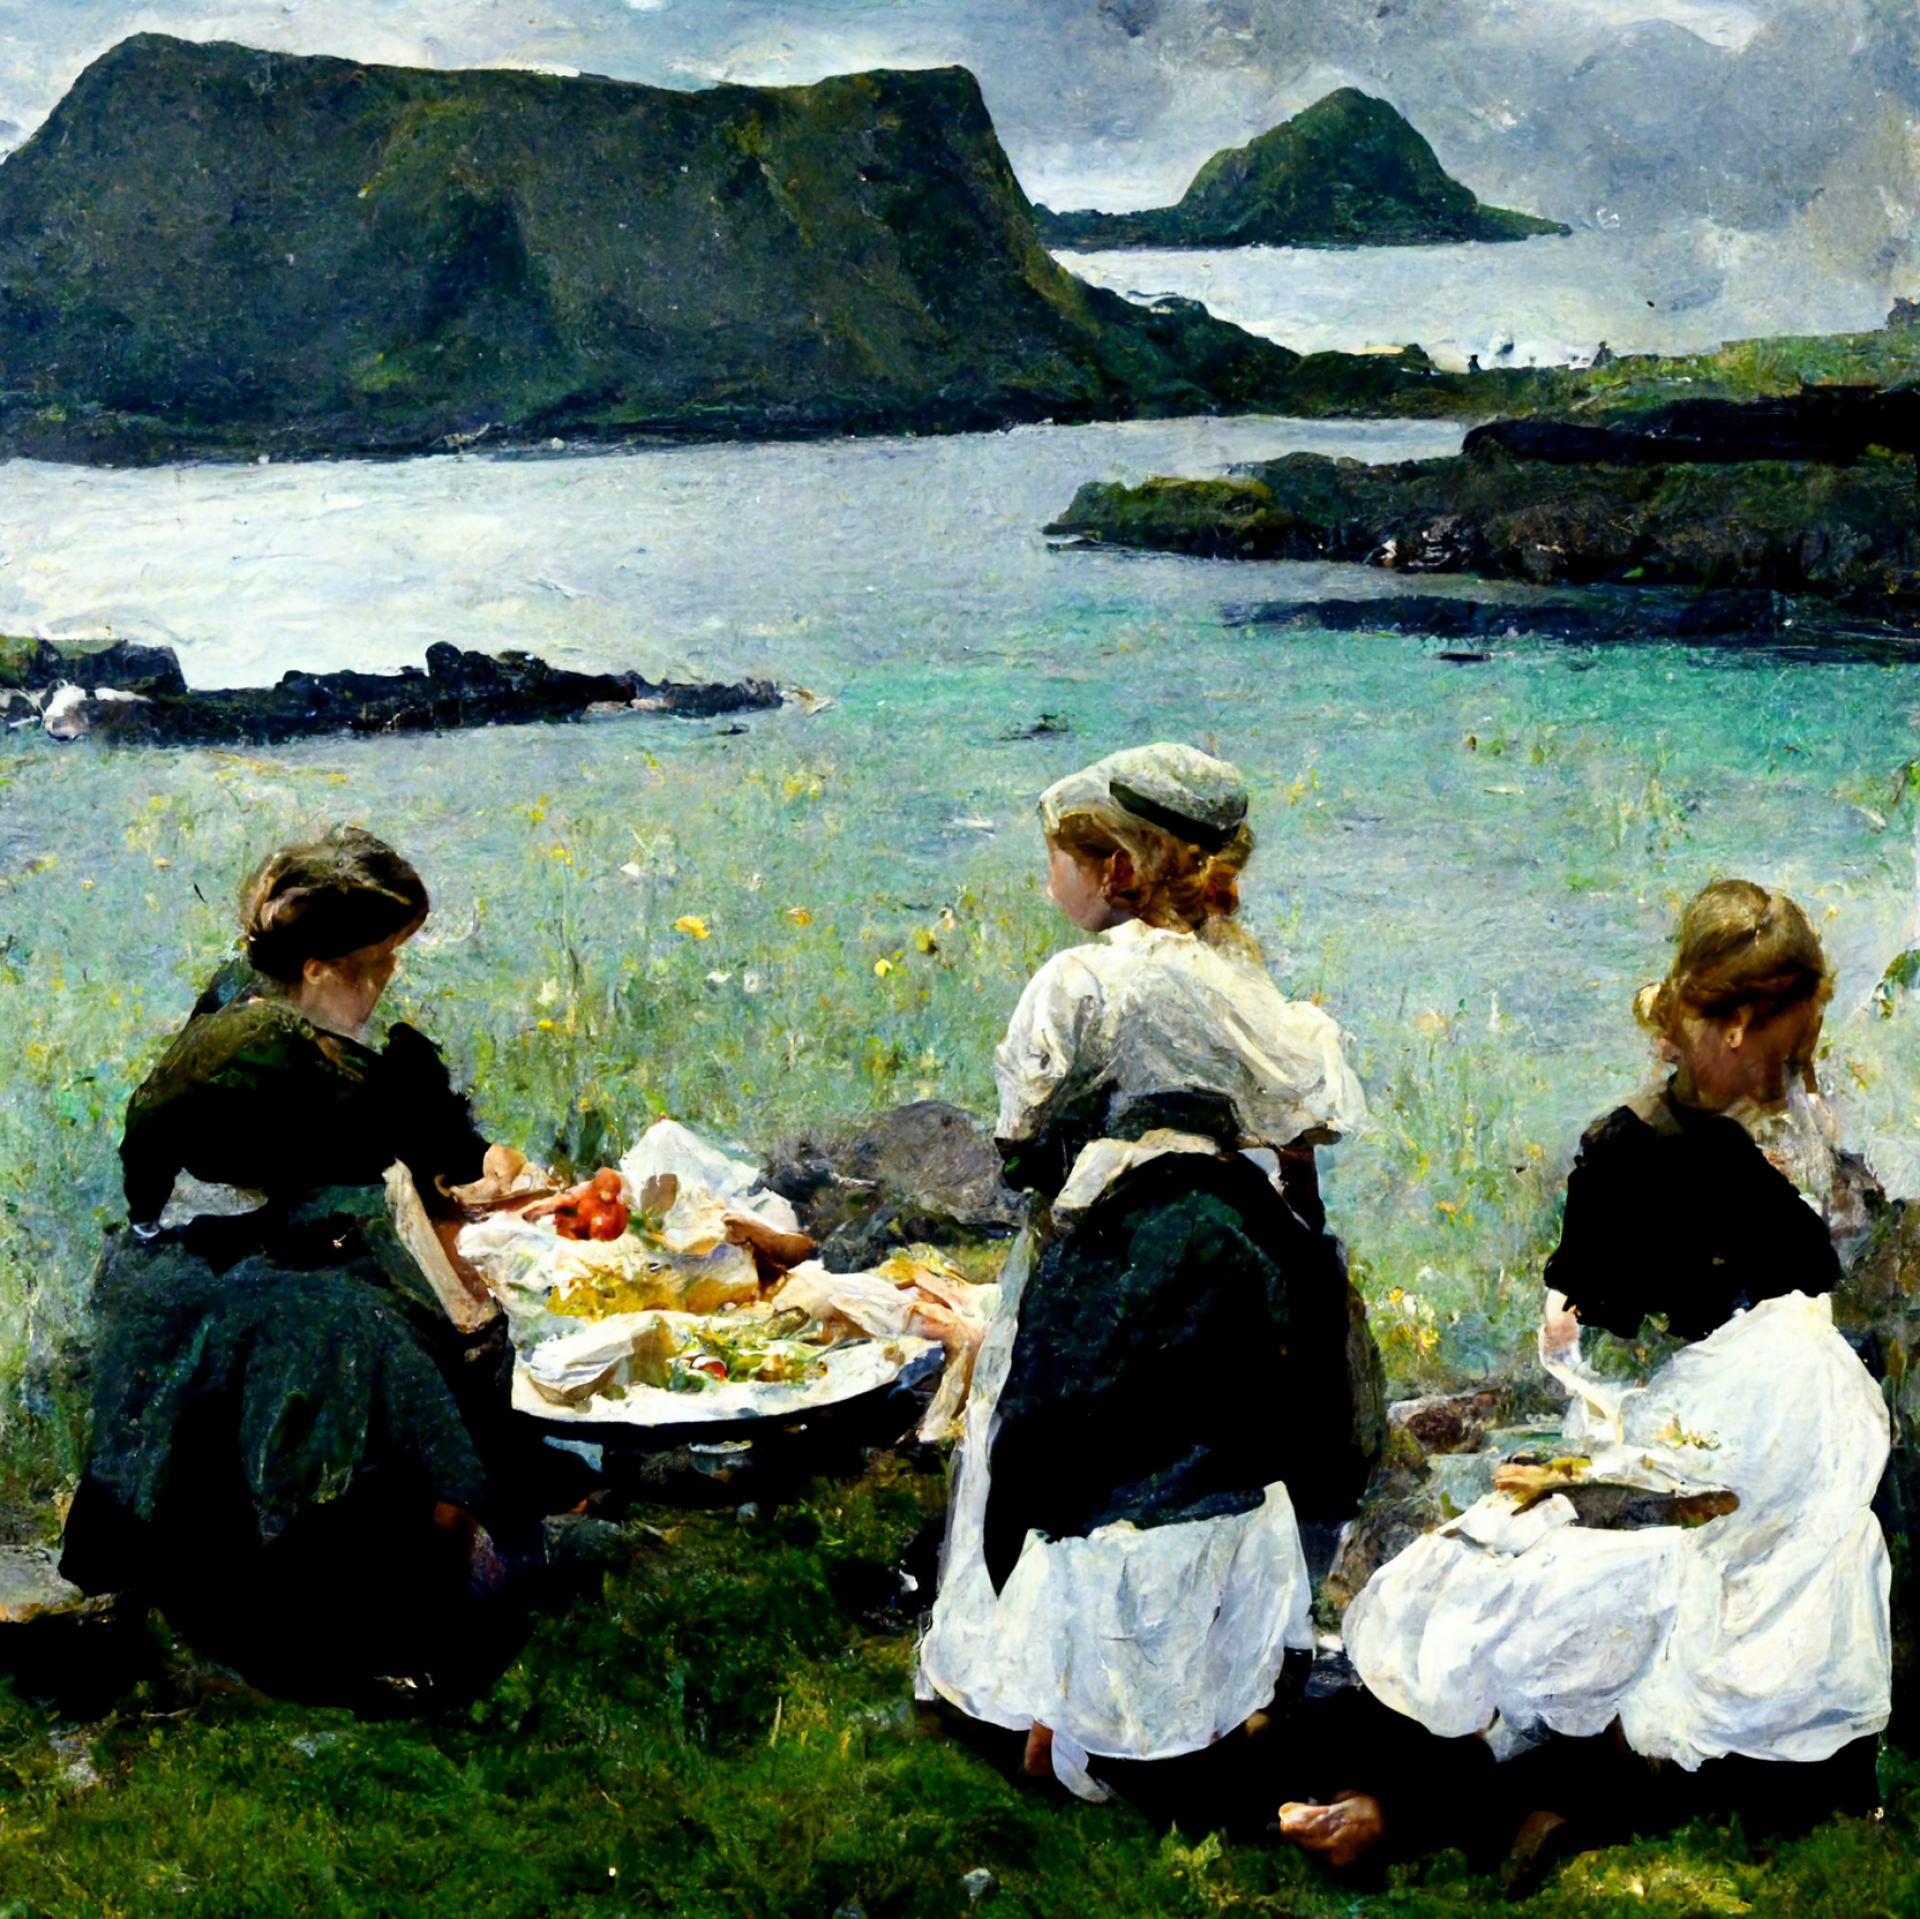 AI-generated image from Midjourney, the Faroe Islands inspired by Edouard Manet.